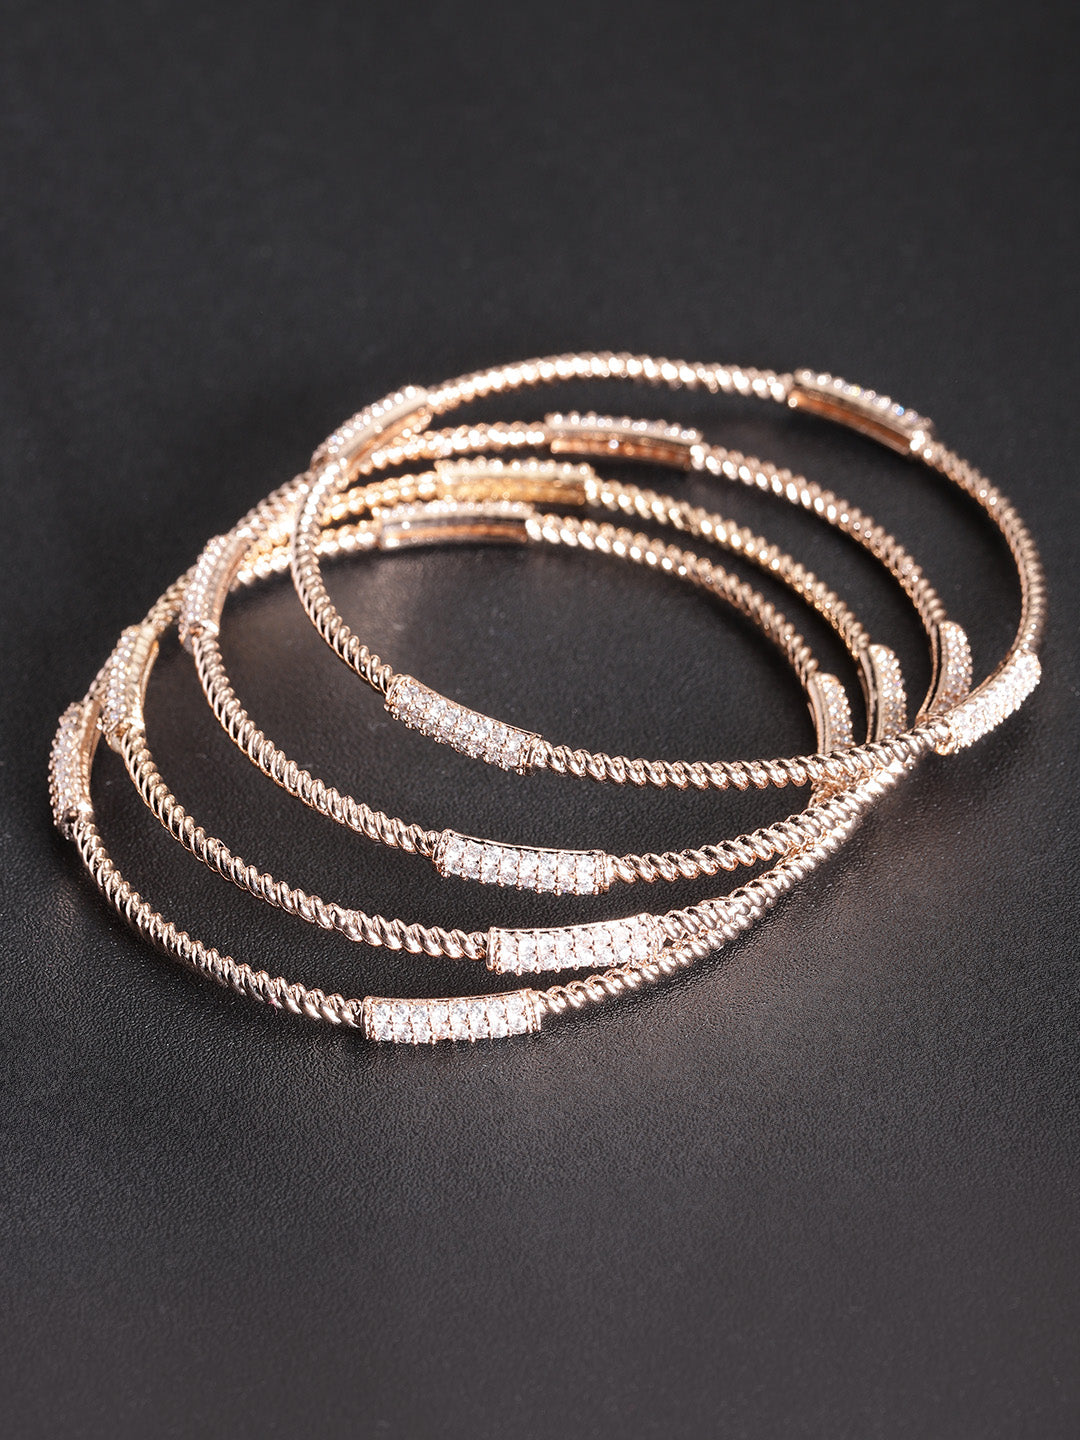 Set Of 4 Rose Gold Plated CZ Stone Studded Sleek Bangles For Women And Girls